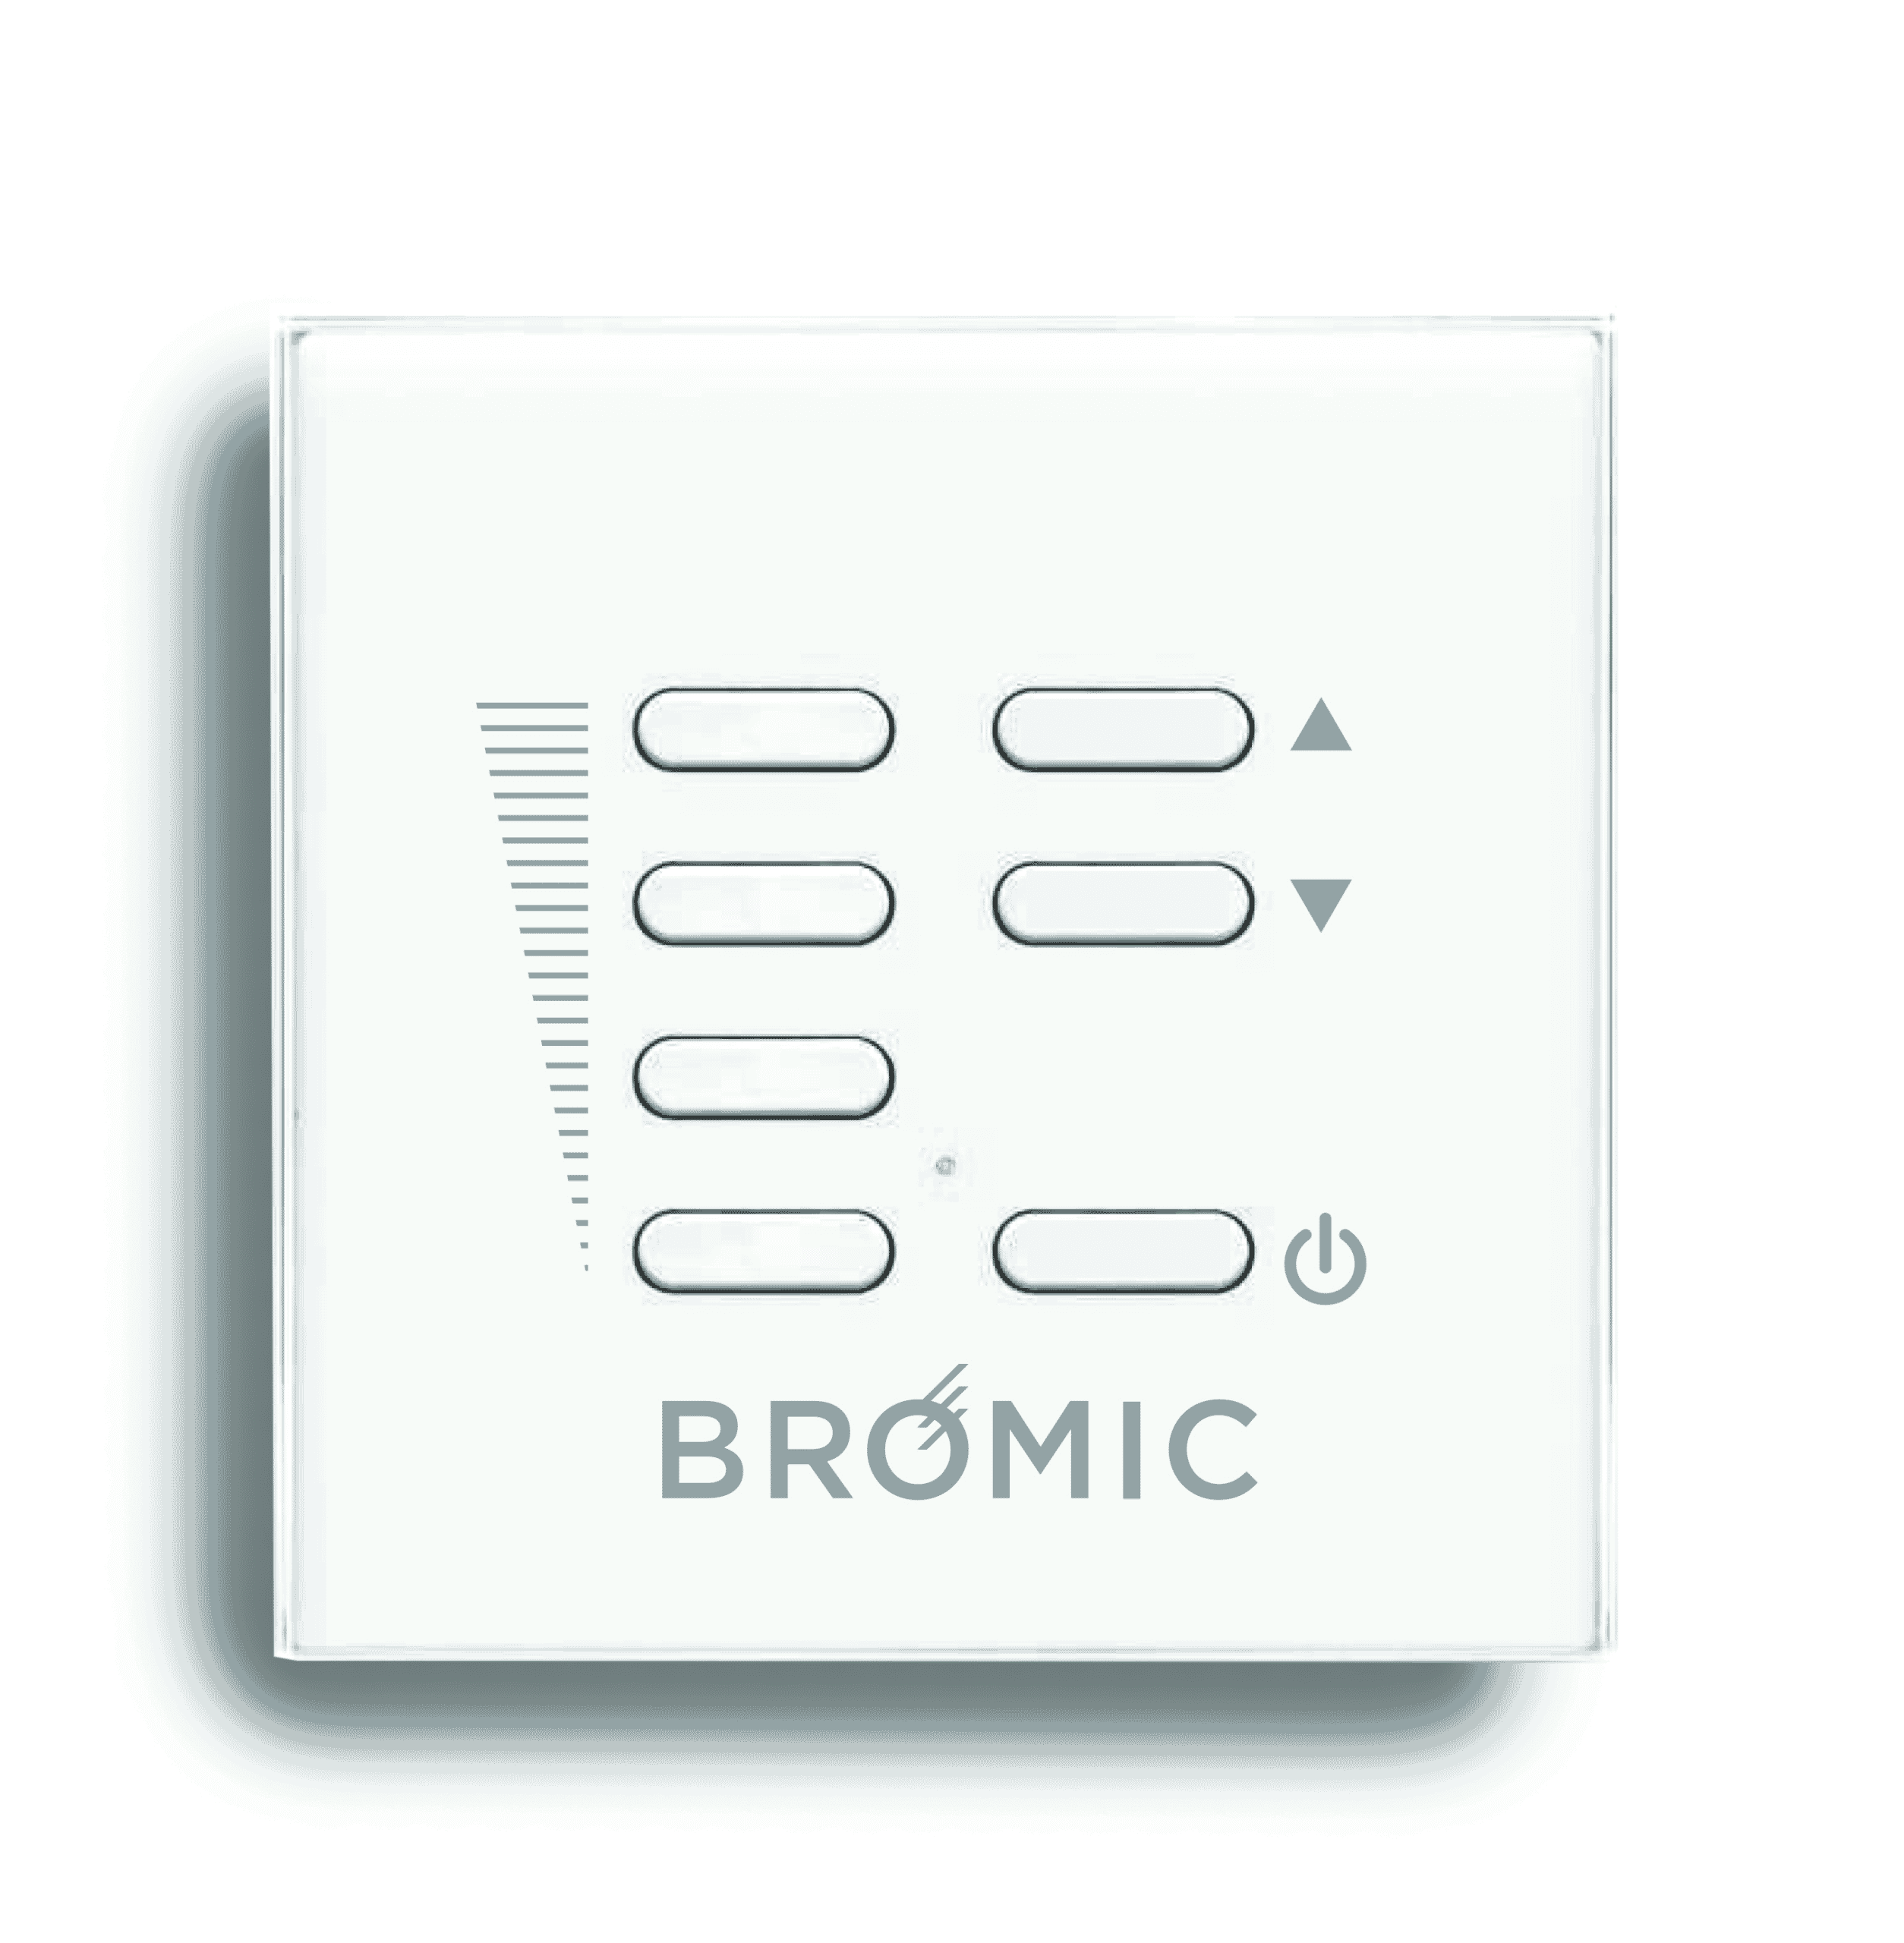 Bromic Electric Heater Dimmer Remote Control System